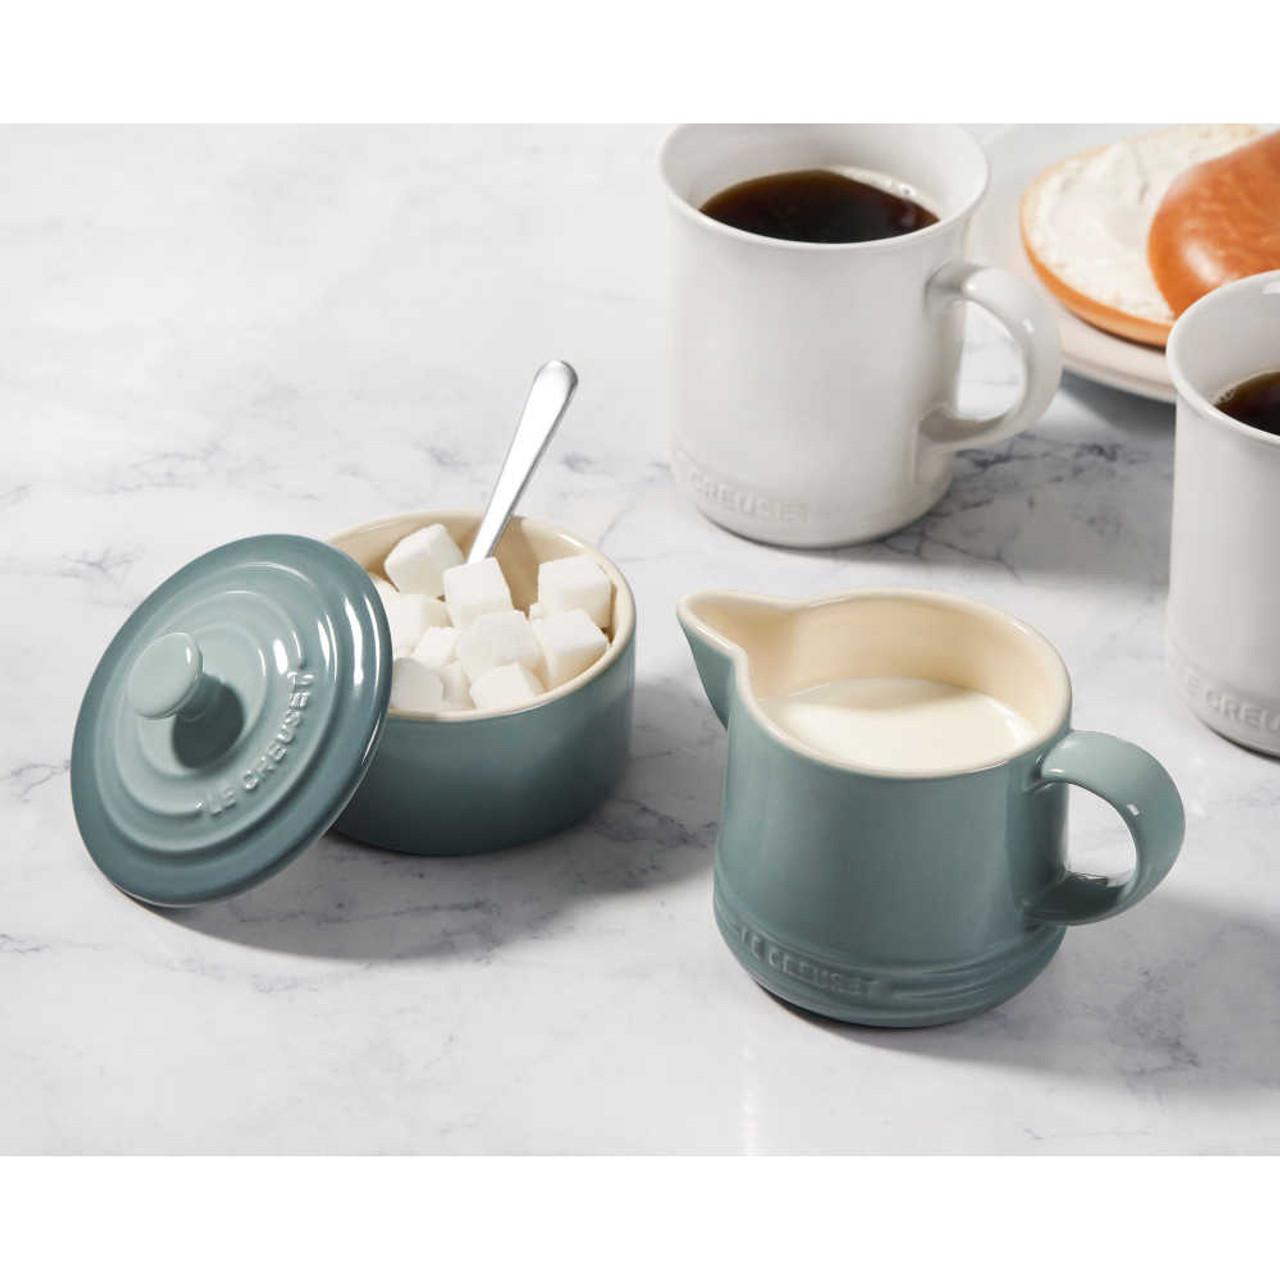 https://cdn11.bigcommerce.com/s-hccytny0od/images/stencil/1280x1280/products/4975/21073/Le_Creuset_Cream_and_Sugar_Set_in_Sea_Salt__85082.1675883894.jpg?c=2?imbypass=on